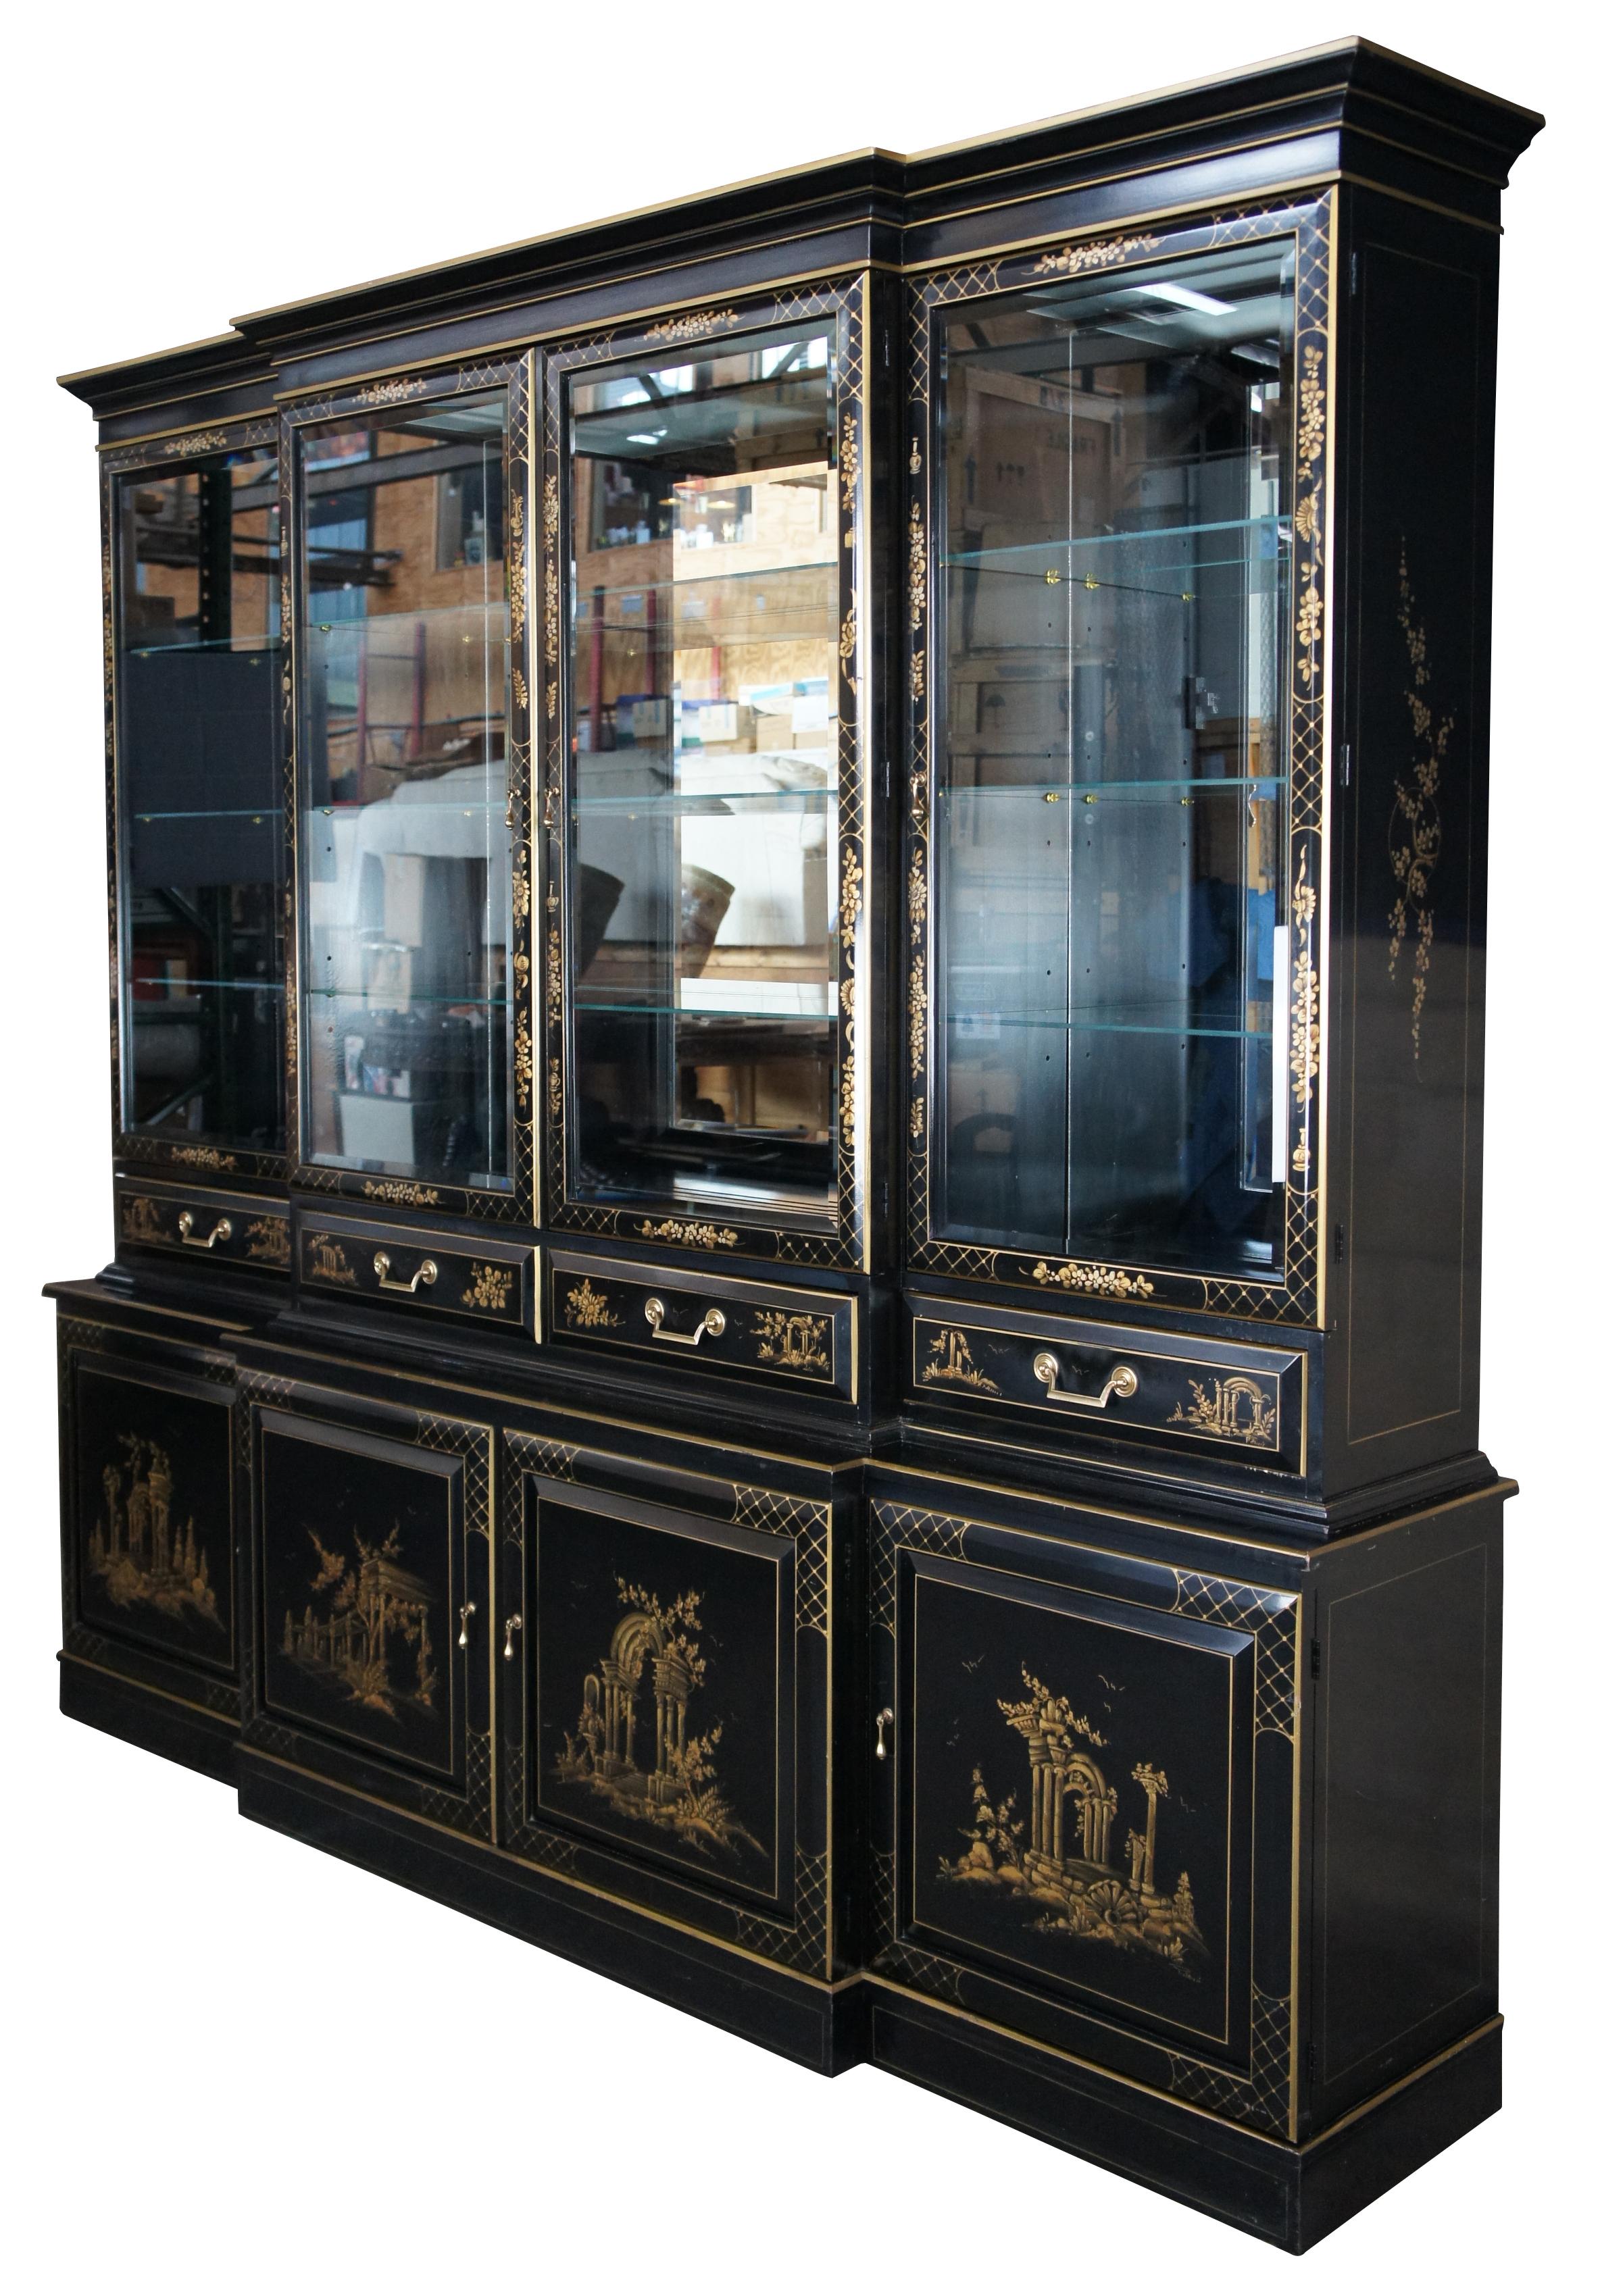 Vintage Union National breakfront china cabinet featuring black lacquer with a garden motif featuring flowers and architectural columns and gazebo. Signed by artist lower right.

The Union National breakfront was rated as the finest breakfront in